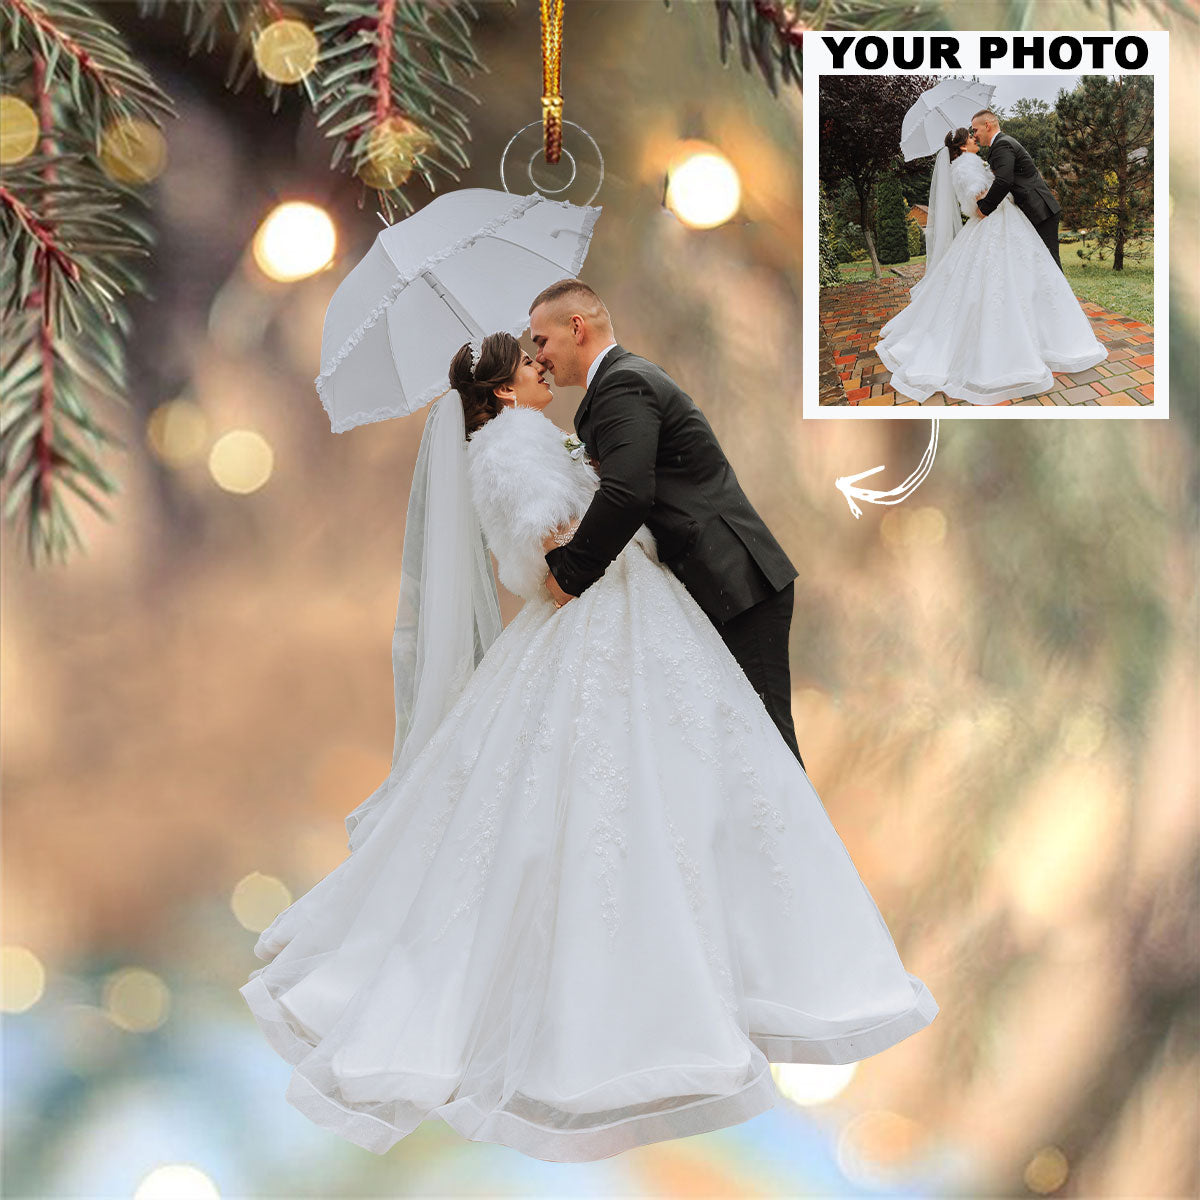 My Wedding Day - Personalized Custom Photo Mica Ornament - Wedding, Christmas Gift For Couple, Wife, Husband, Family Members